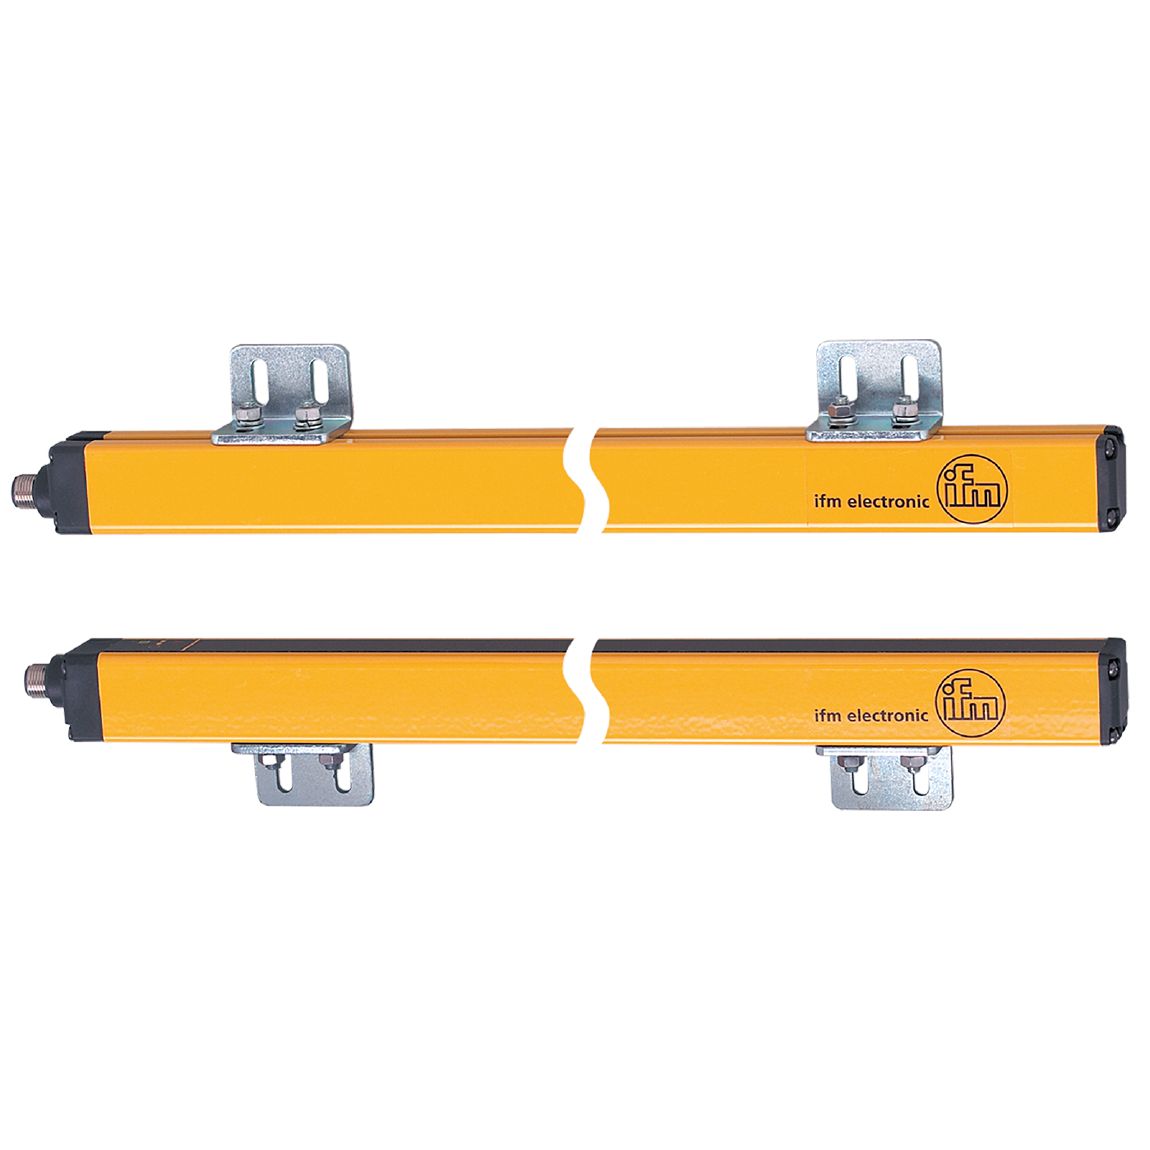 OY087S - Safety light curtain - ifm